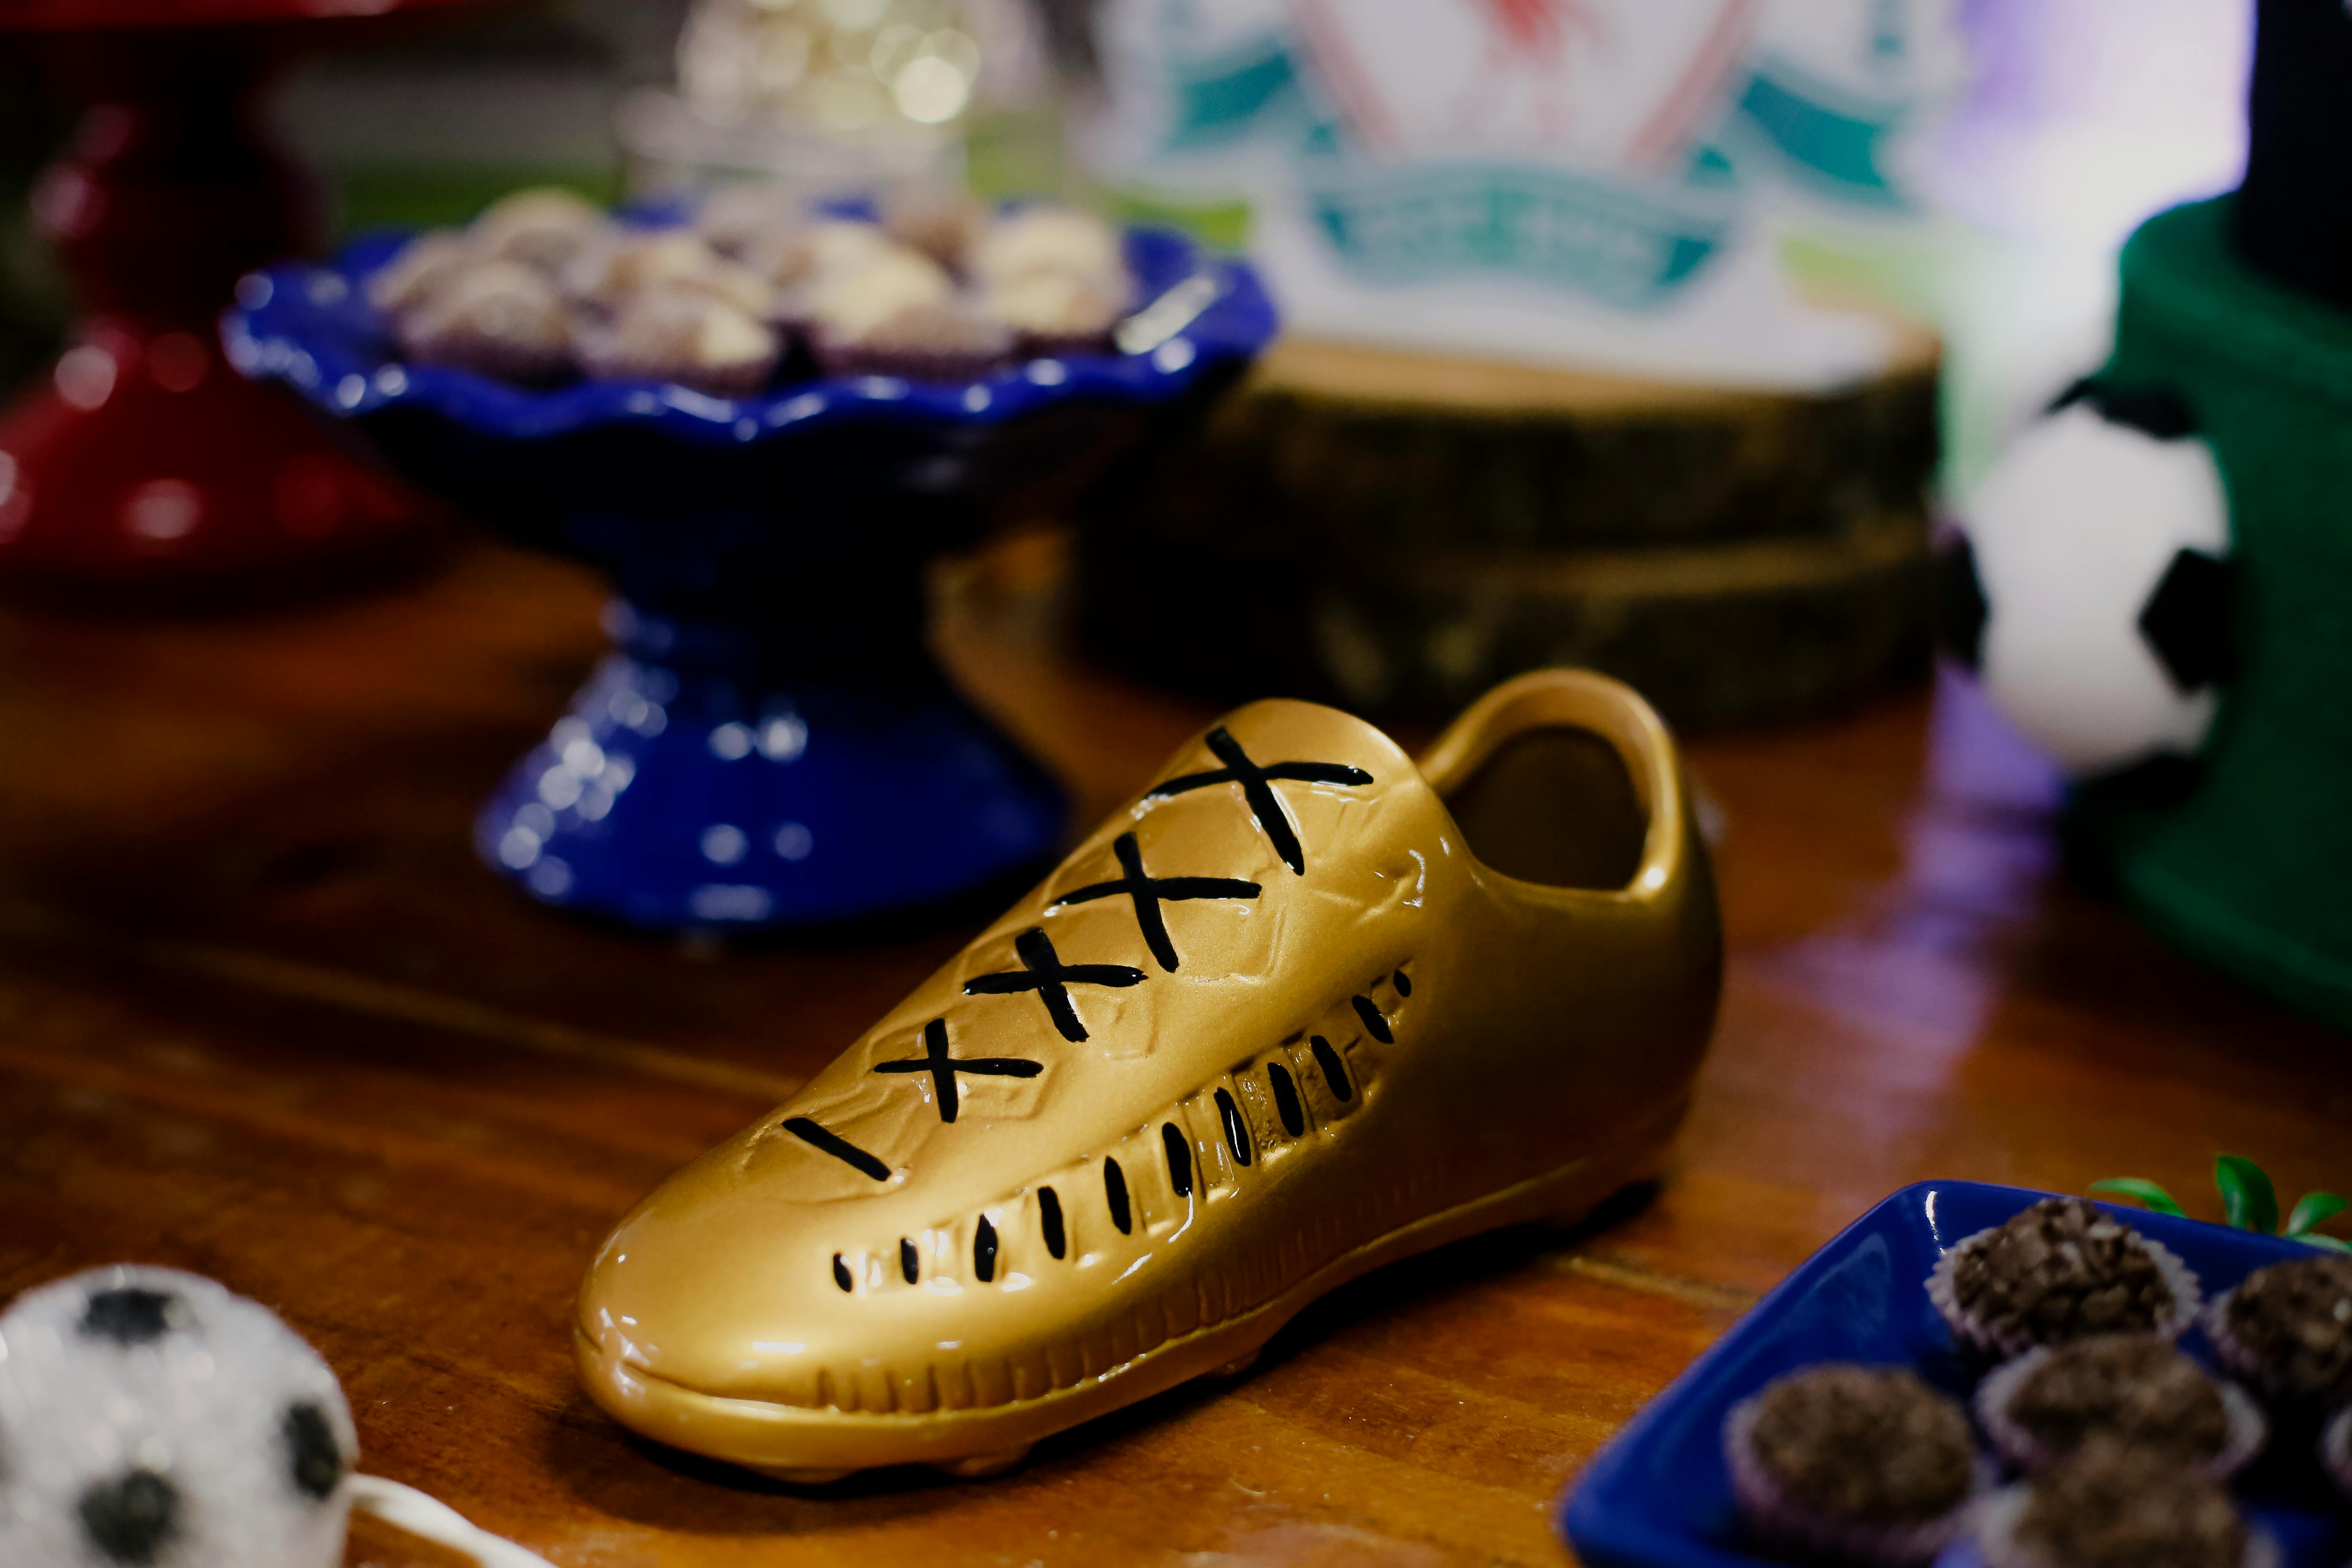 decorative sneaker near plate with sweets on table at home